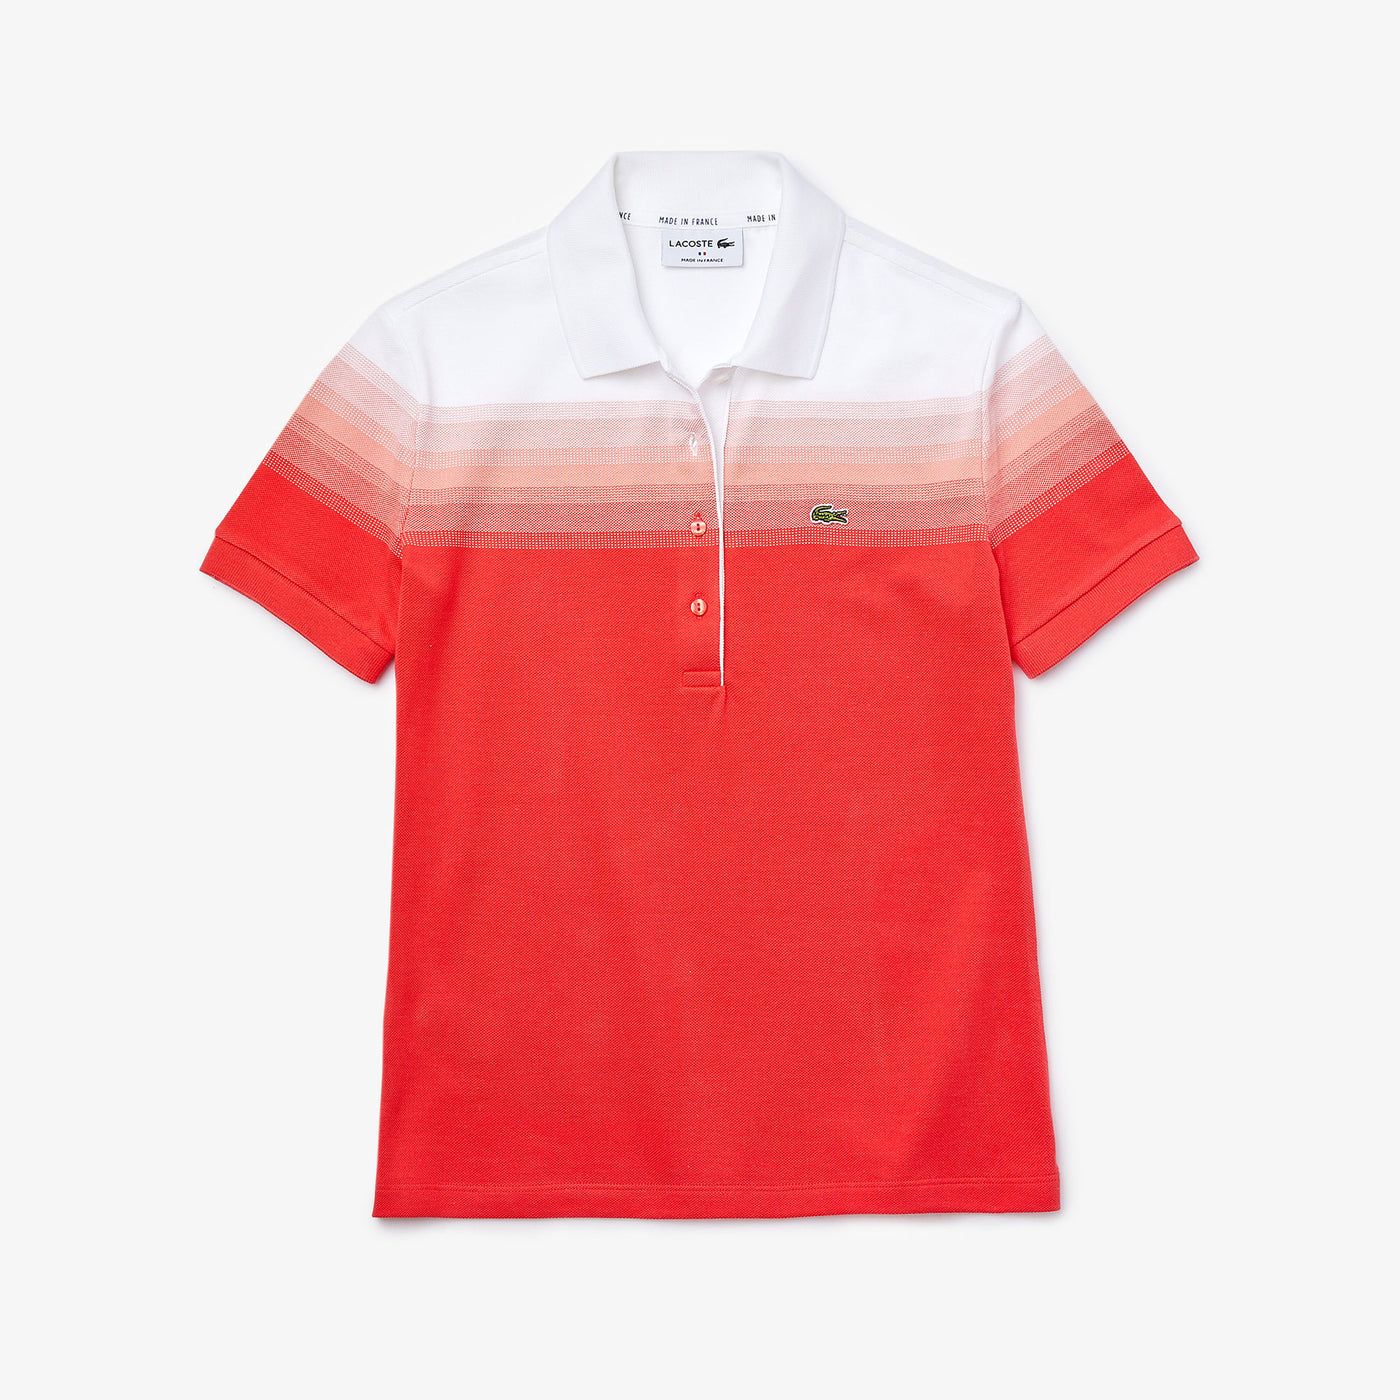 WOMEN'S LACOSTE MADE IN FRANCE ORGANIC COTTON PIQUÉ POLO SHIRT - MyHoldal